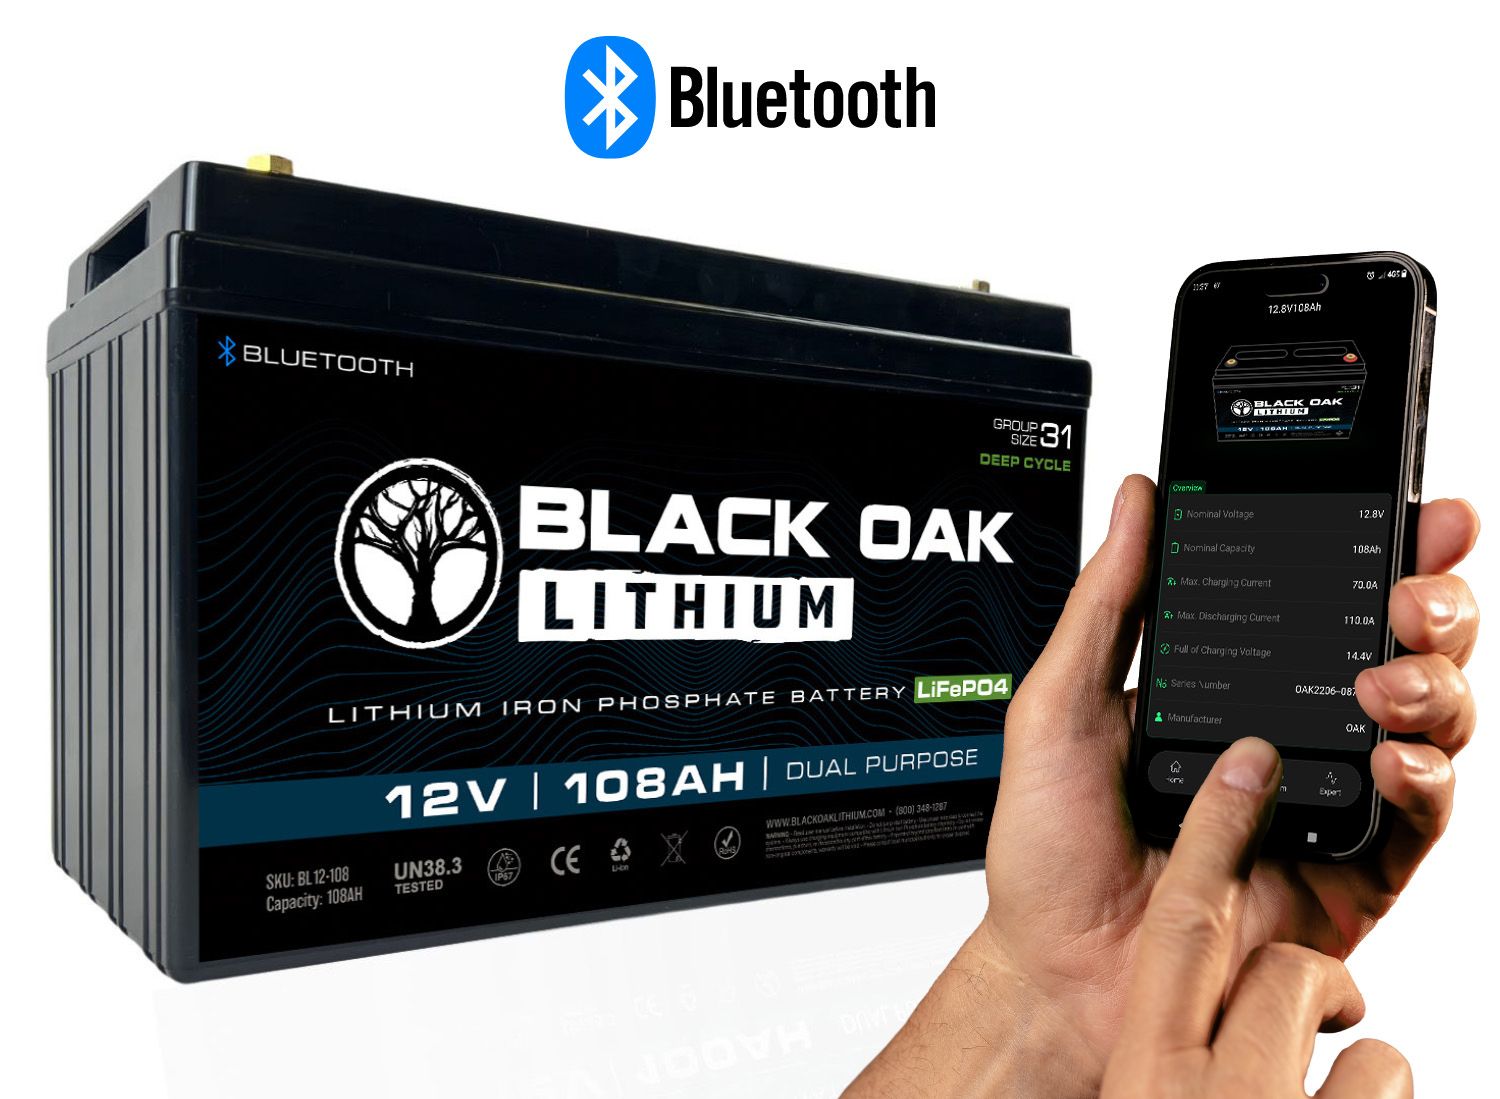 Black Oak Lithium battery connected to the app via Bluetooth